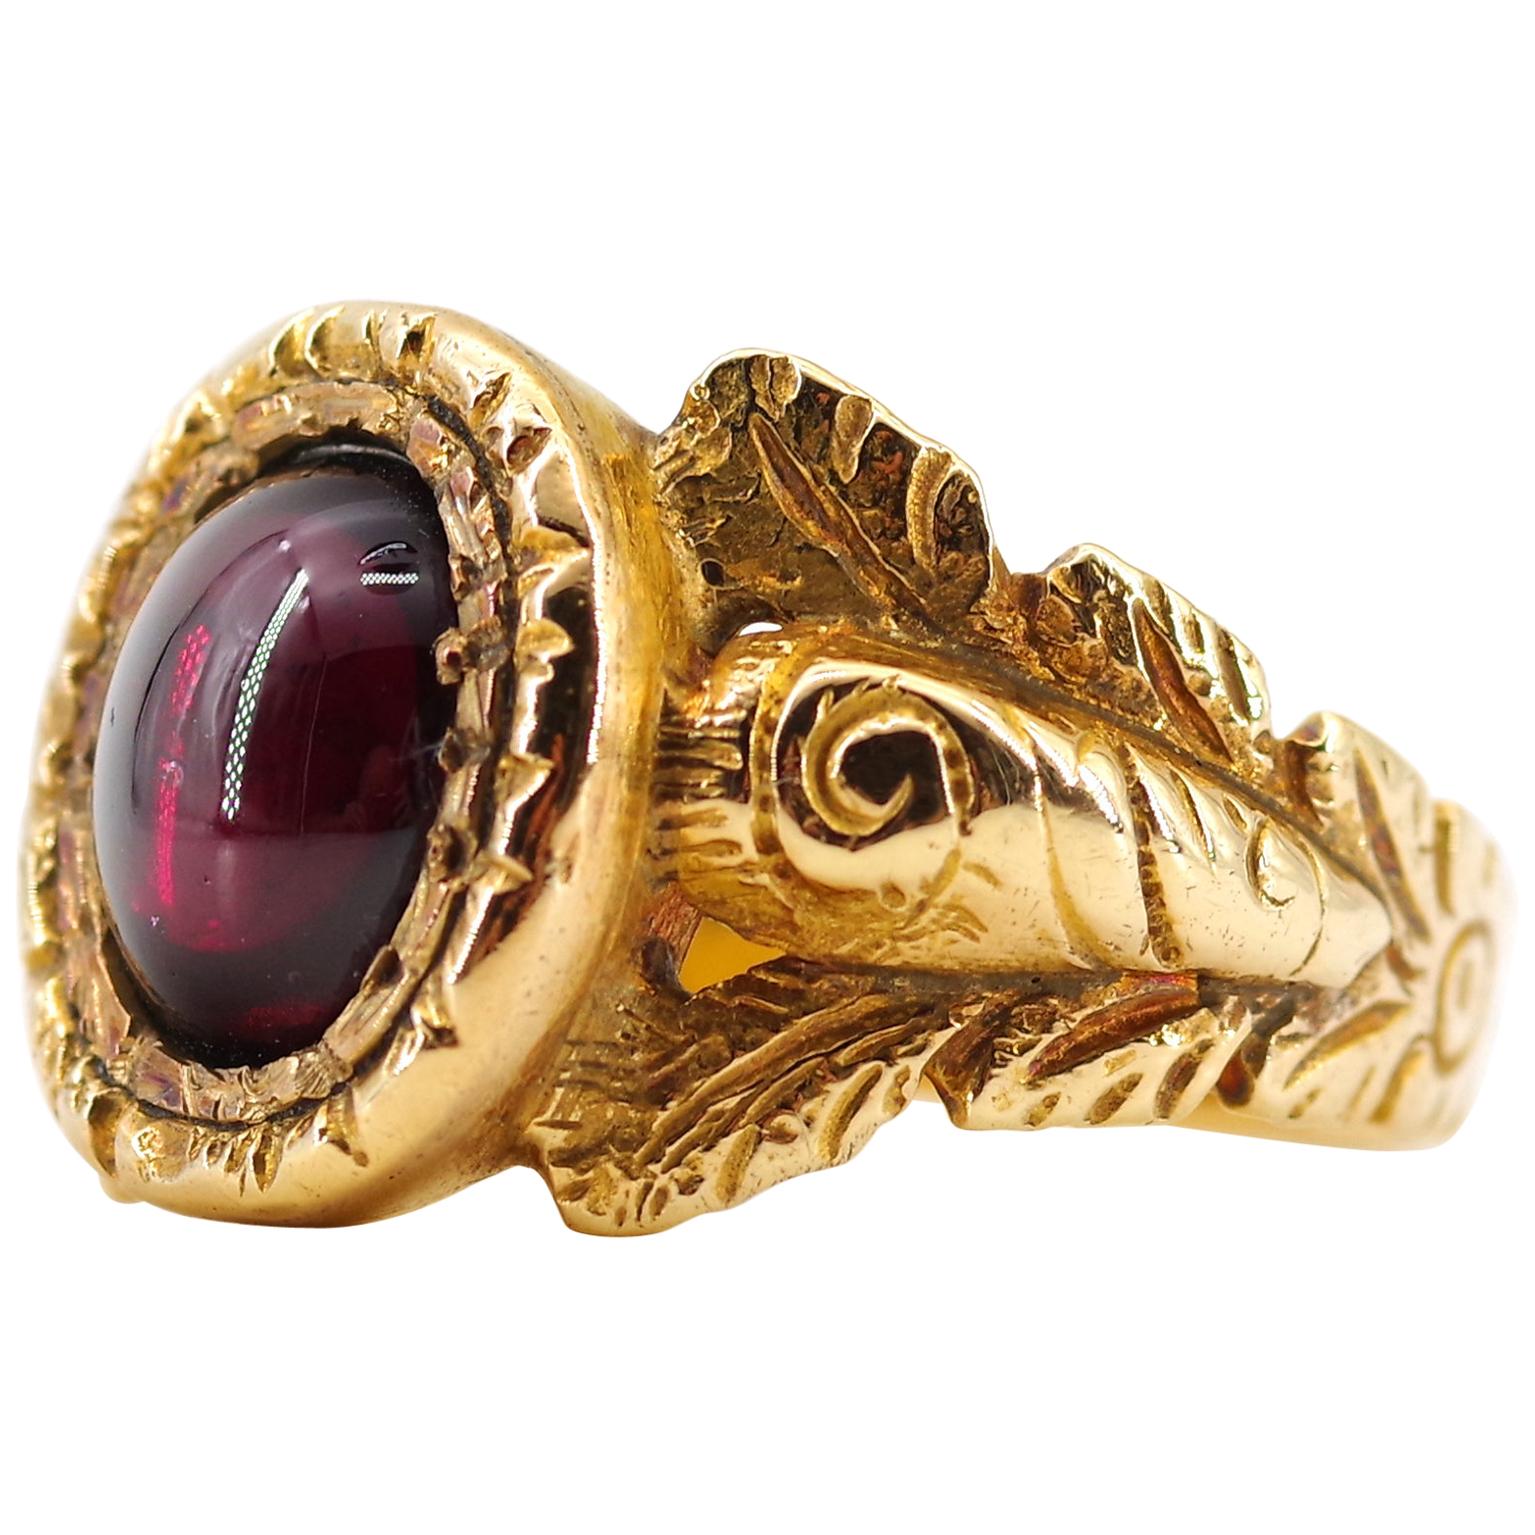 Men's Georgian Garnet Ring from France with Deeply Carved and Engraved Shoulders